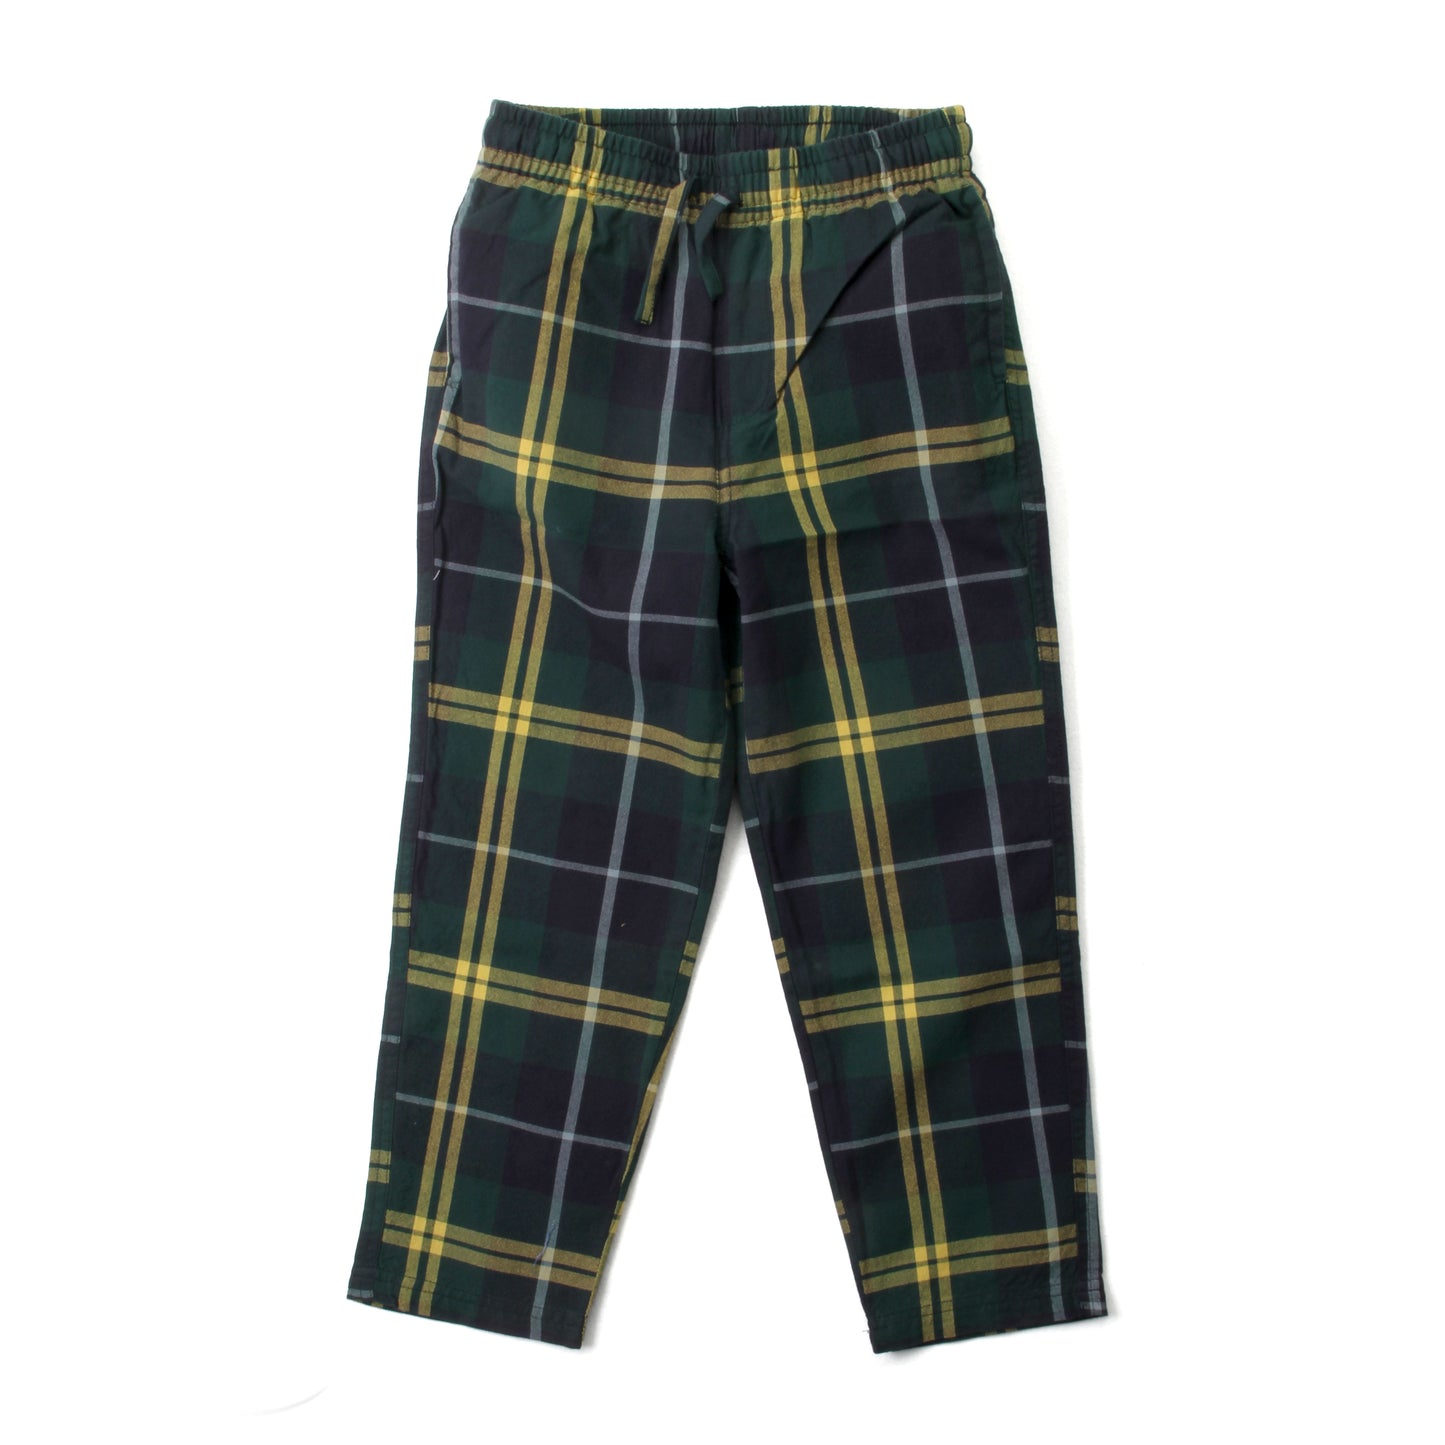 Wes and Willy Boy's Classic Plaid Pant